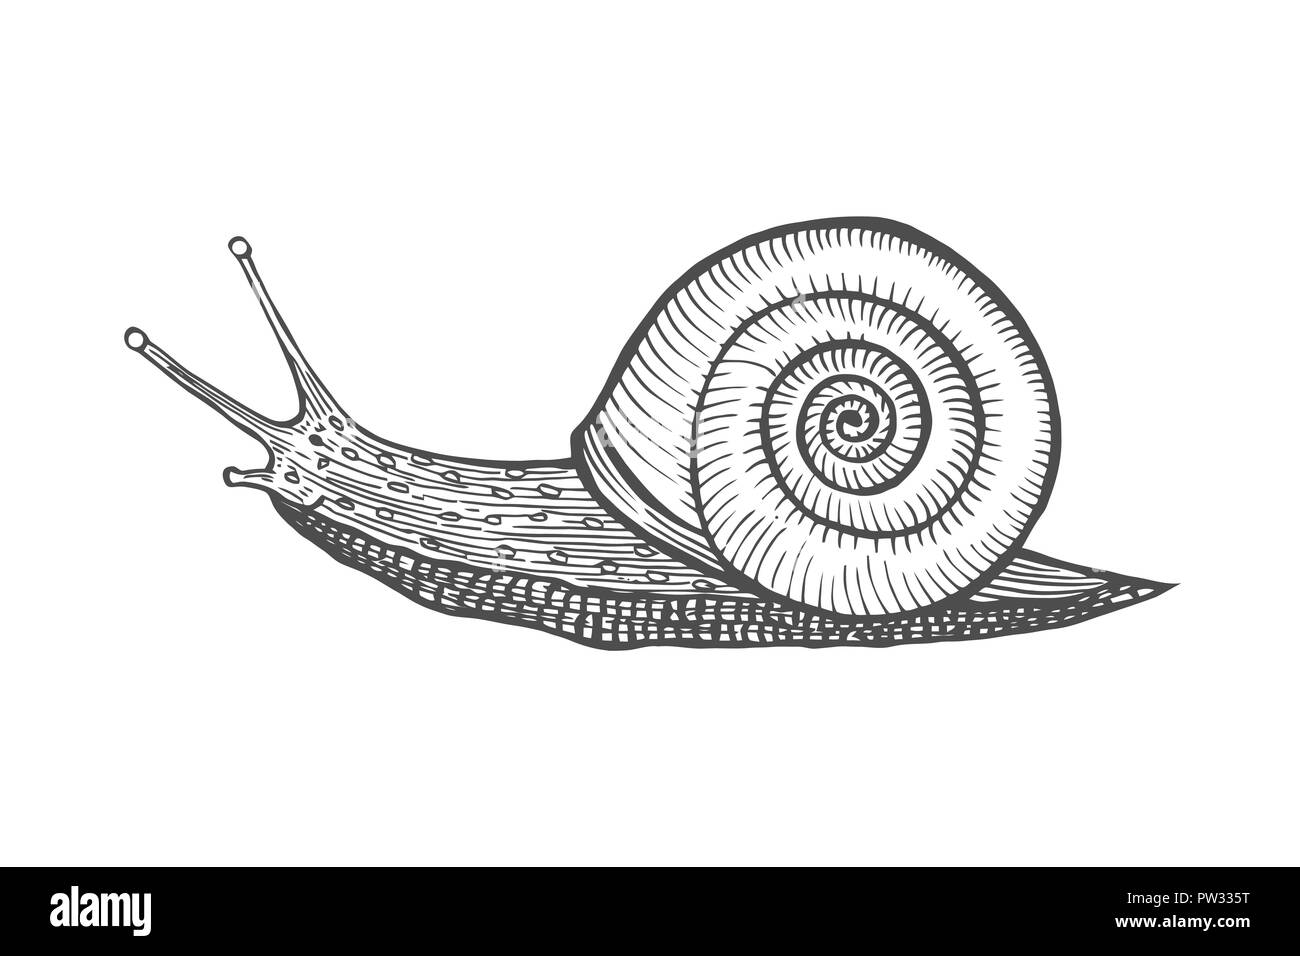 Vector antique engraving illustration of snail isolated on white background Stock Vector